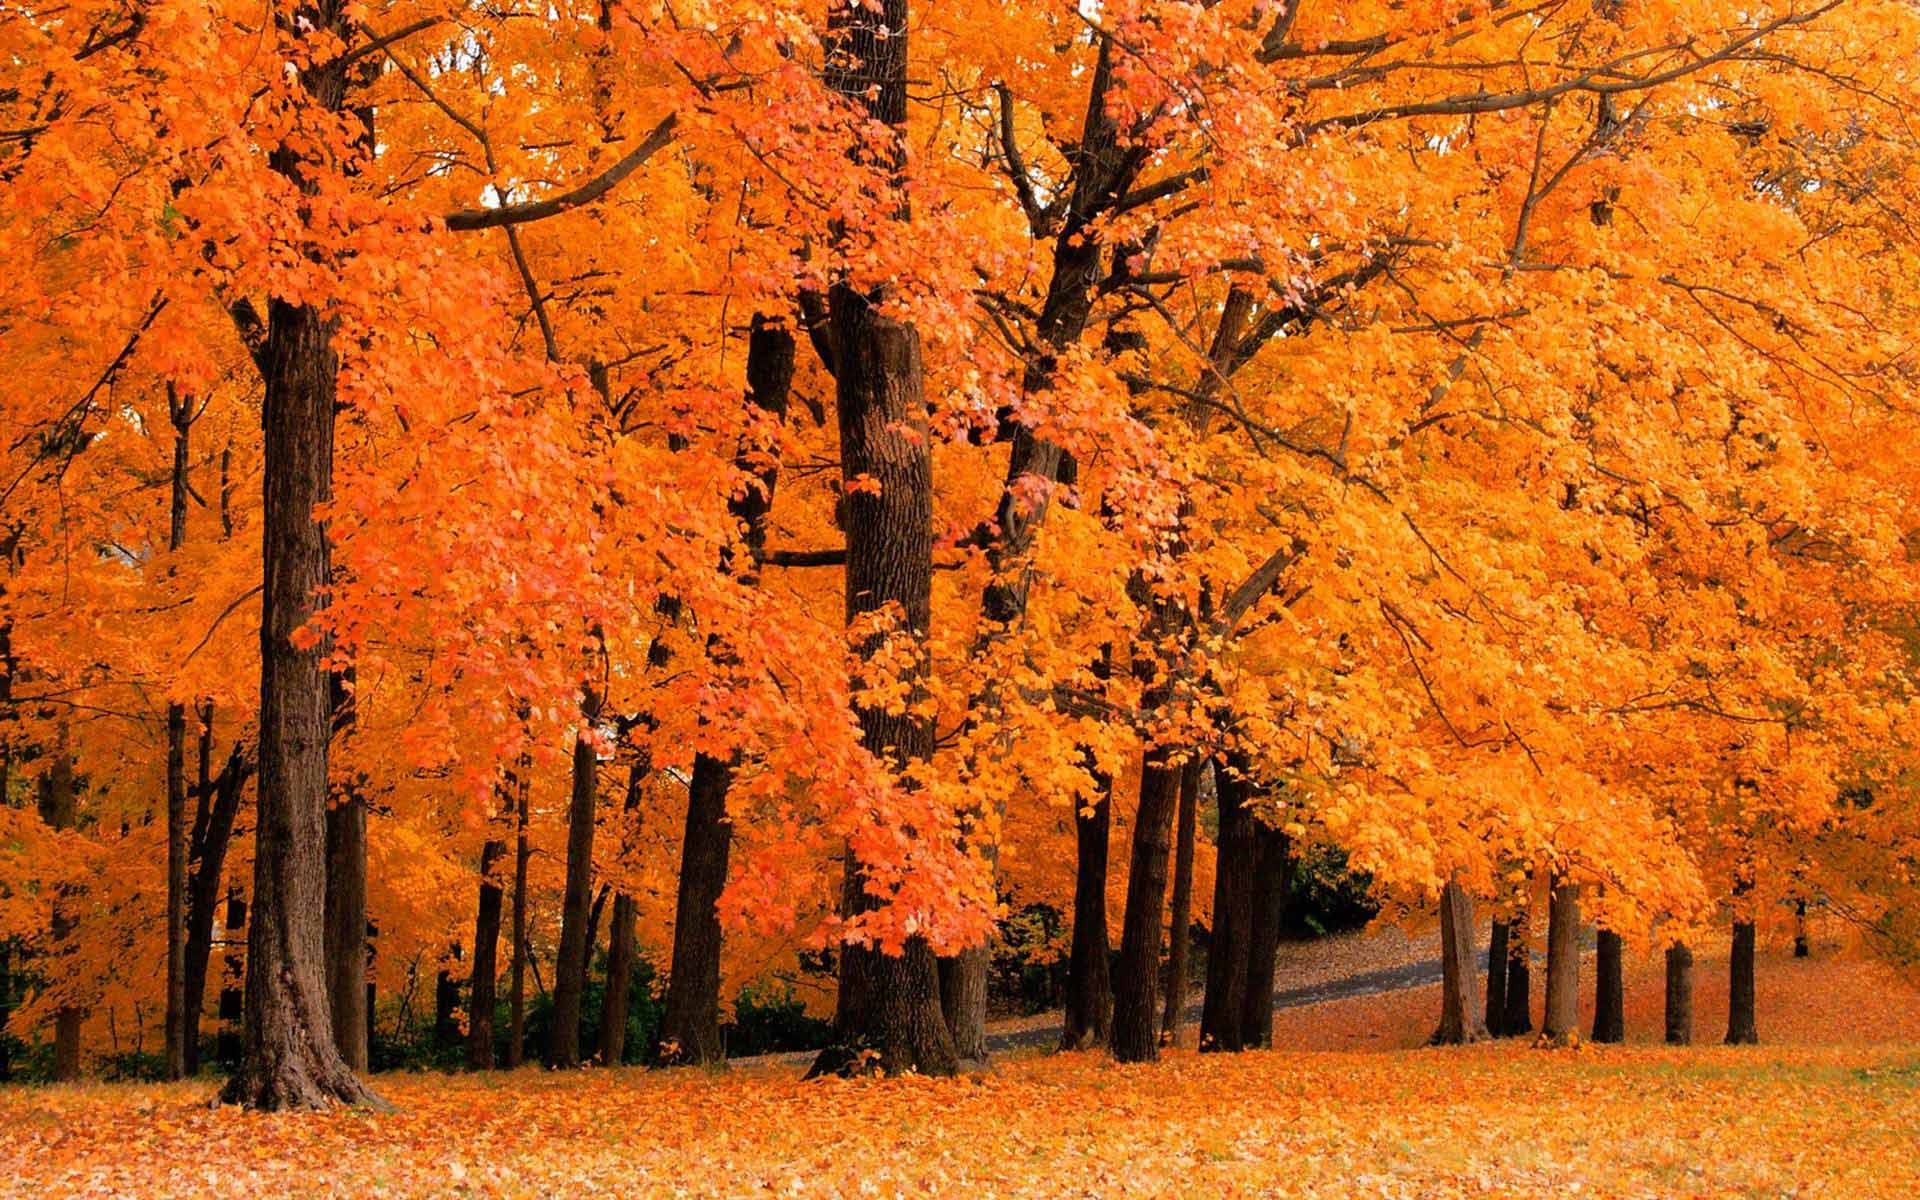 5-places-to-check-out-fall-foliage-around-pittsburgh-pittsburgh-beautiful